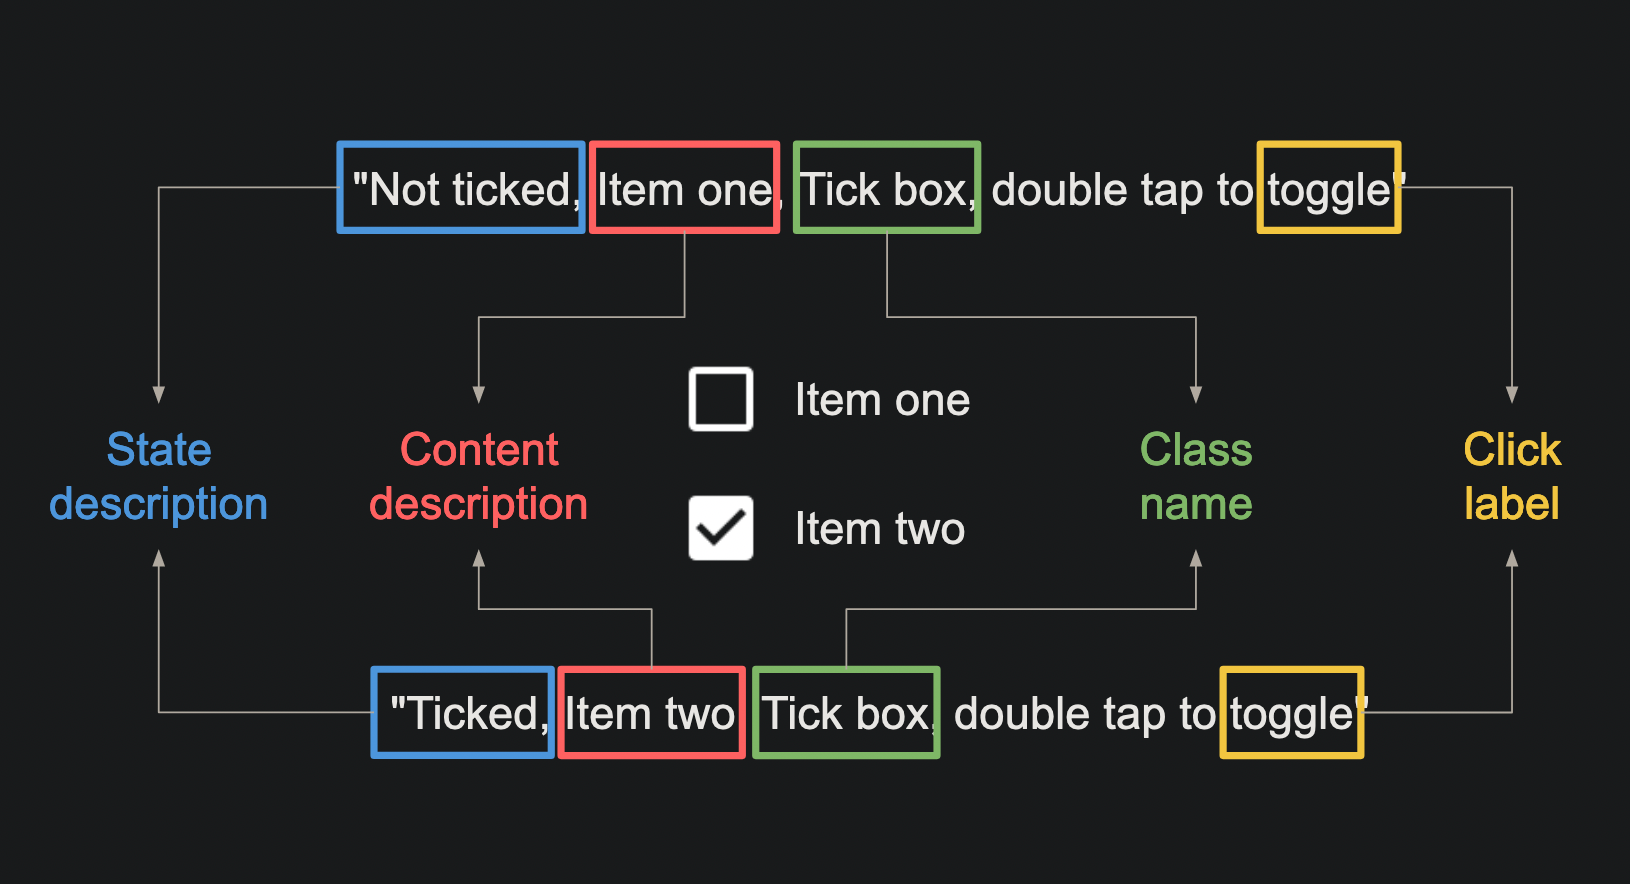 Image shows two CheckBox items and the text “Not ticked, item one, tick box, double tap to toggle” next to the unchecked item, and “ticked, item two, tick box, double tap to toggle” next to the checked item. The “not ticked” and “ticked” portions are labelled as state descriptions.